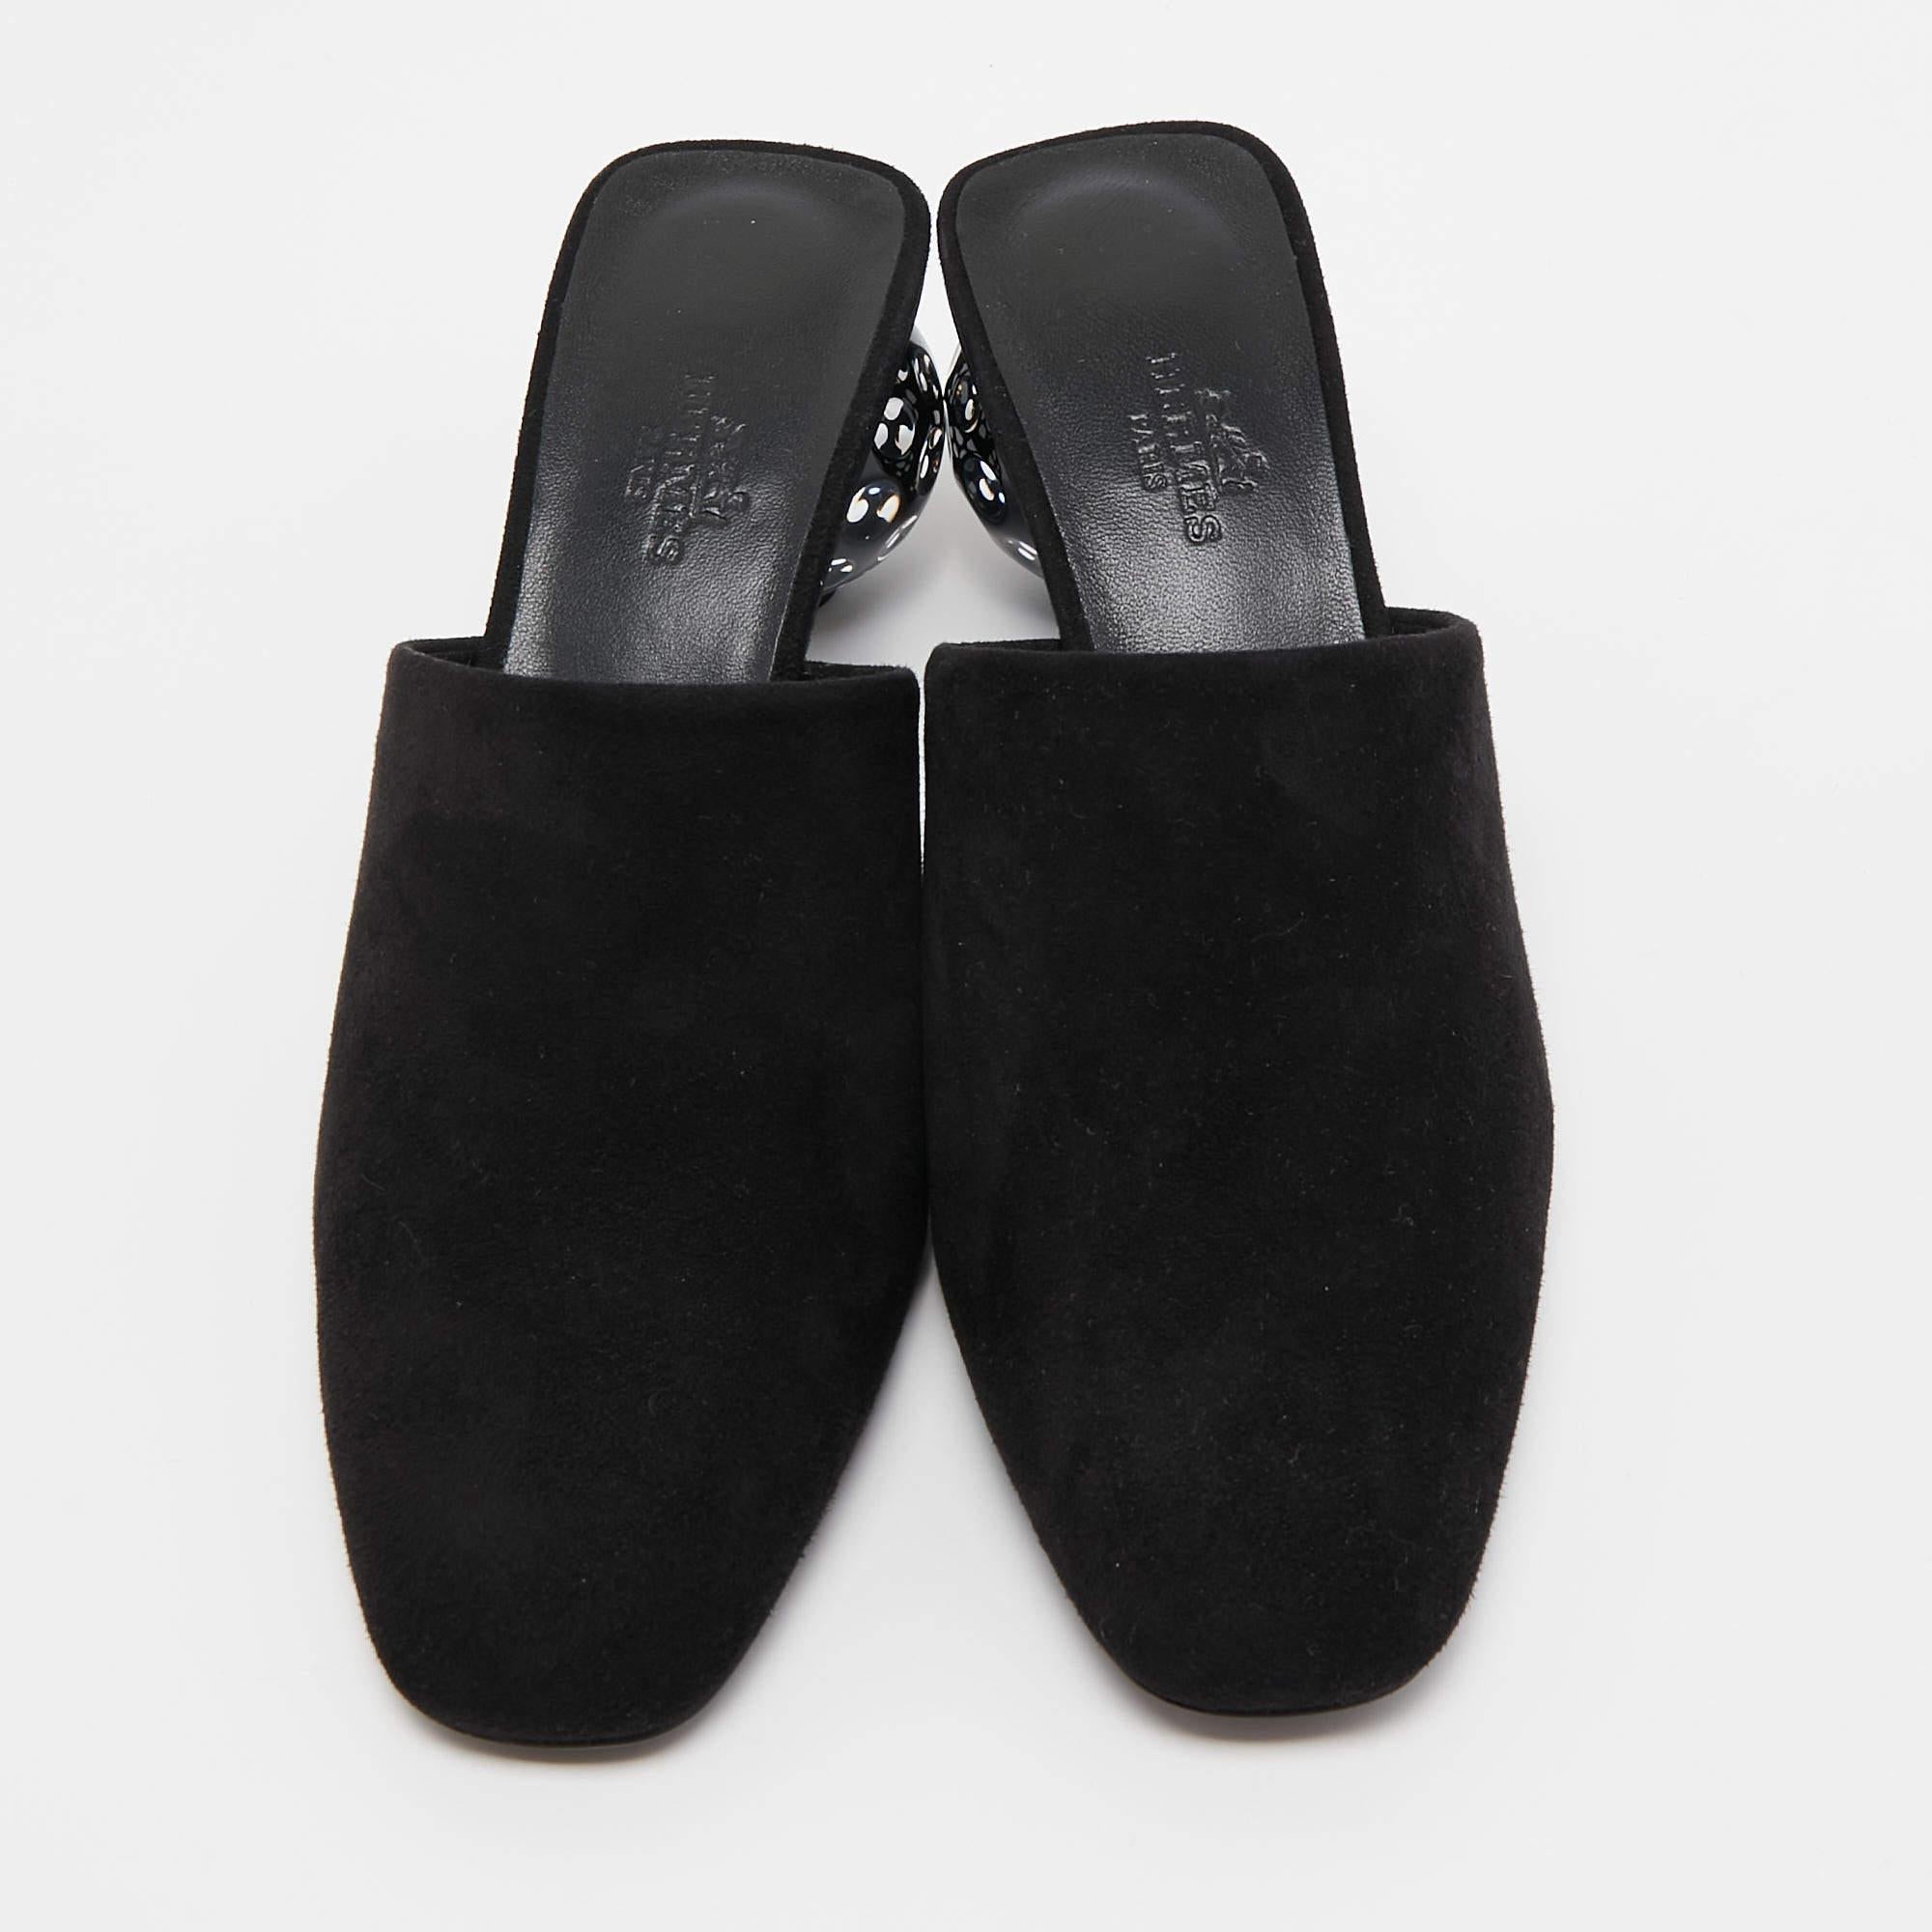 Hermes Black Suede Darcy Mules Size 36.5 4